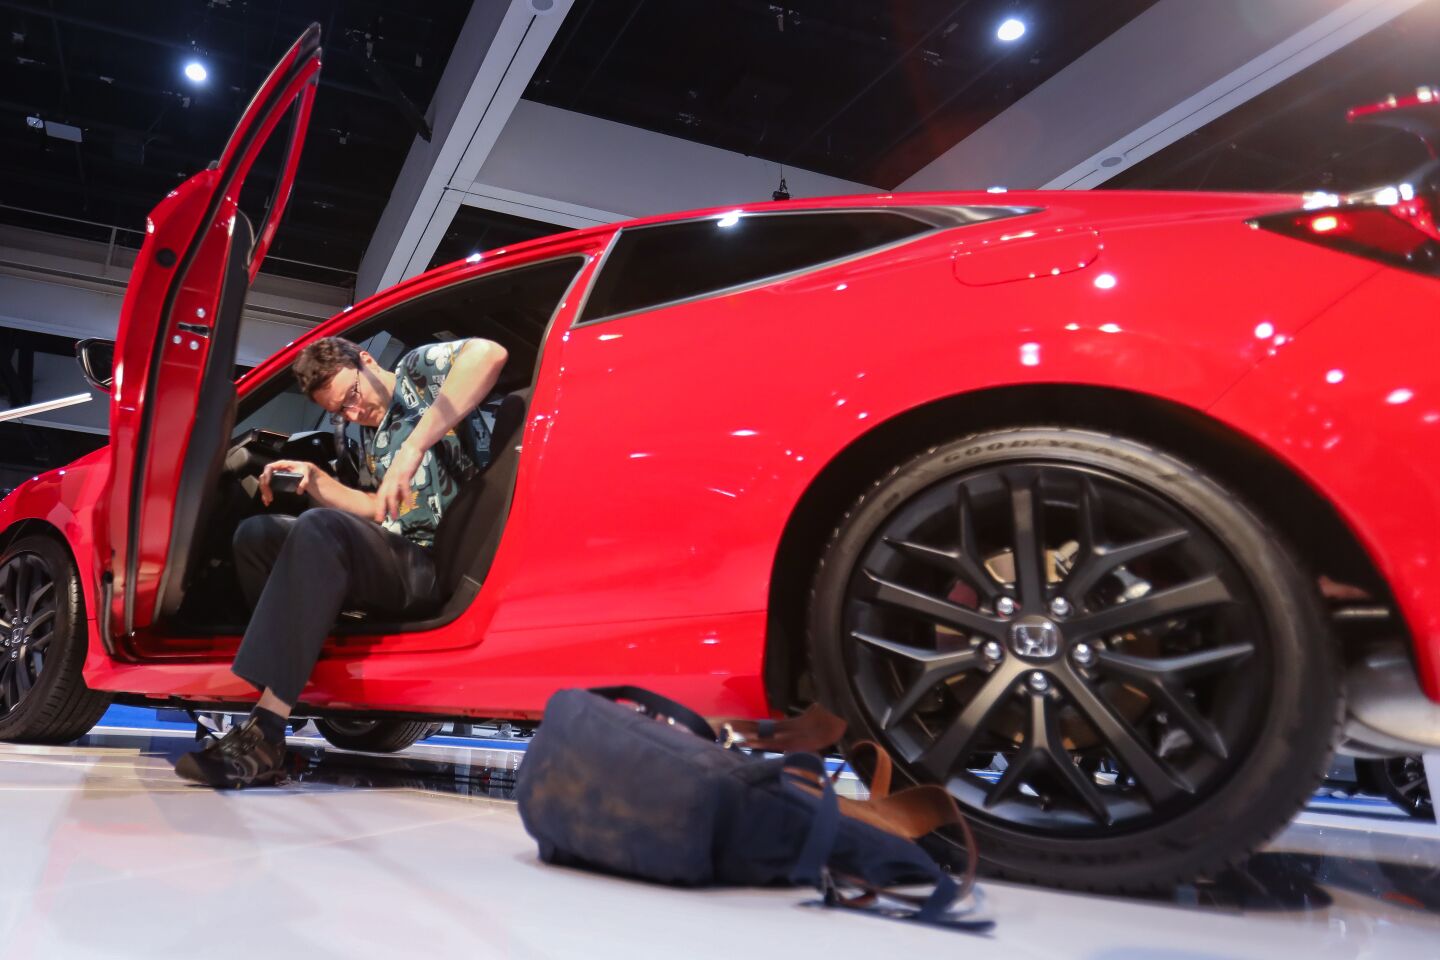 Brian Fisher of Alexandra, Virginia, gets out of a 2020 Honda Civic S1, during the 2020 San Diego International Auto Show at the San Diego Convention Center, January 4, 2020.